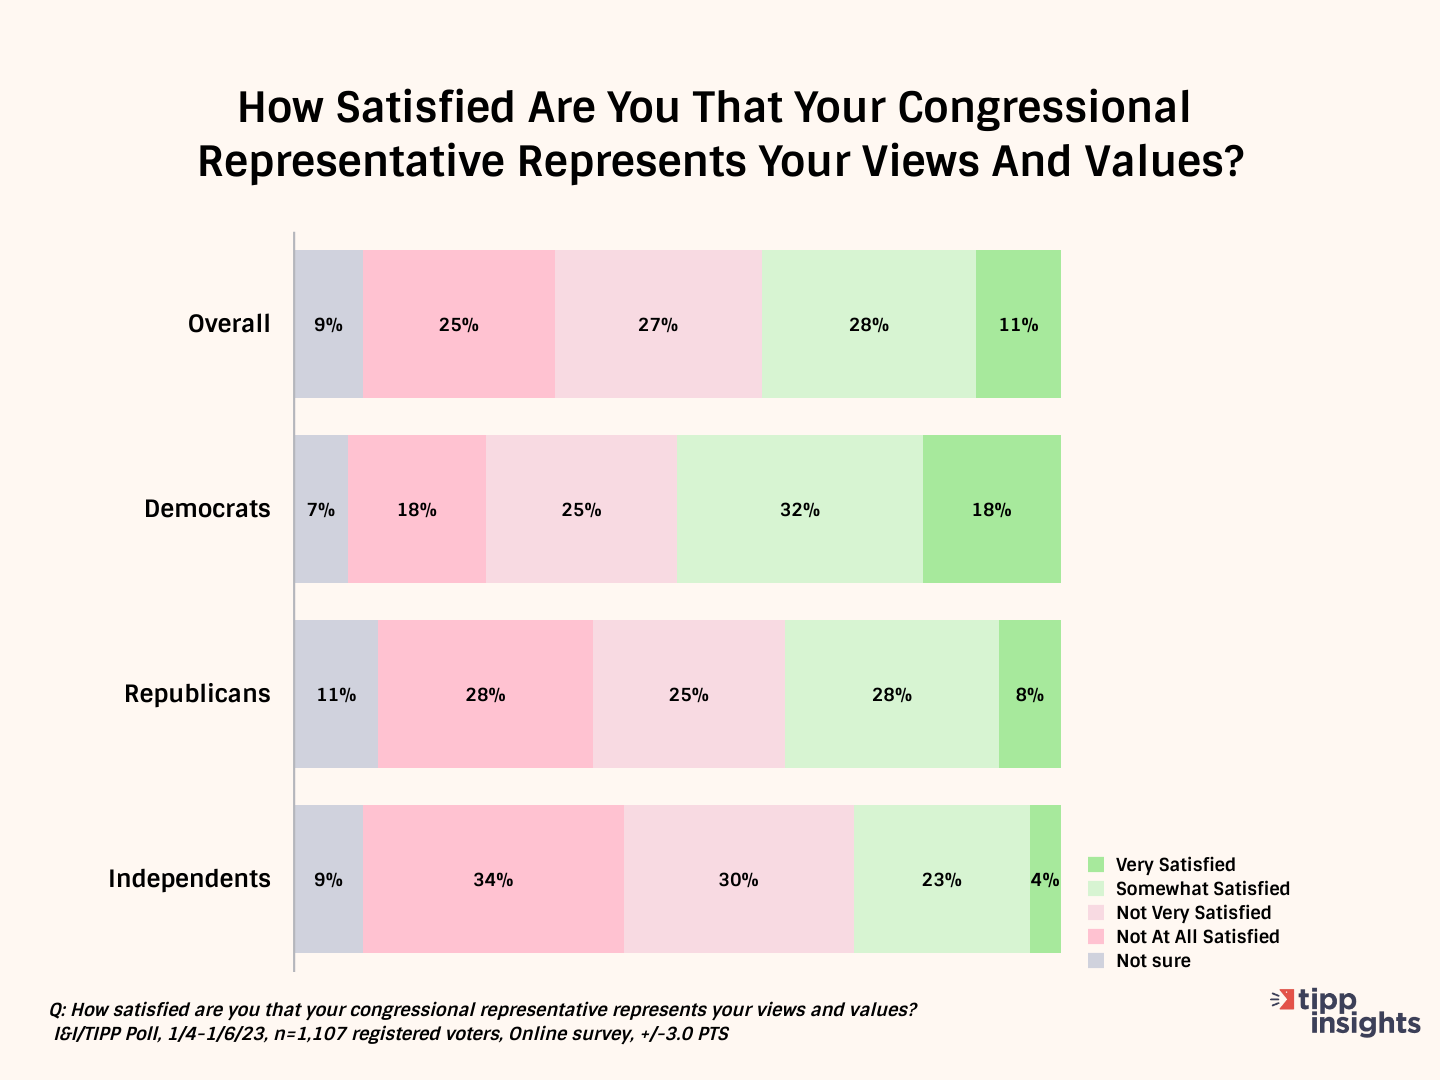 Elected Officials No Longer Reflect Views, Values Of Average Voters: I&I/TIPP Poll